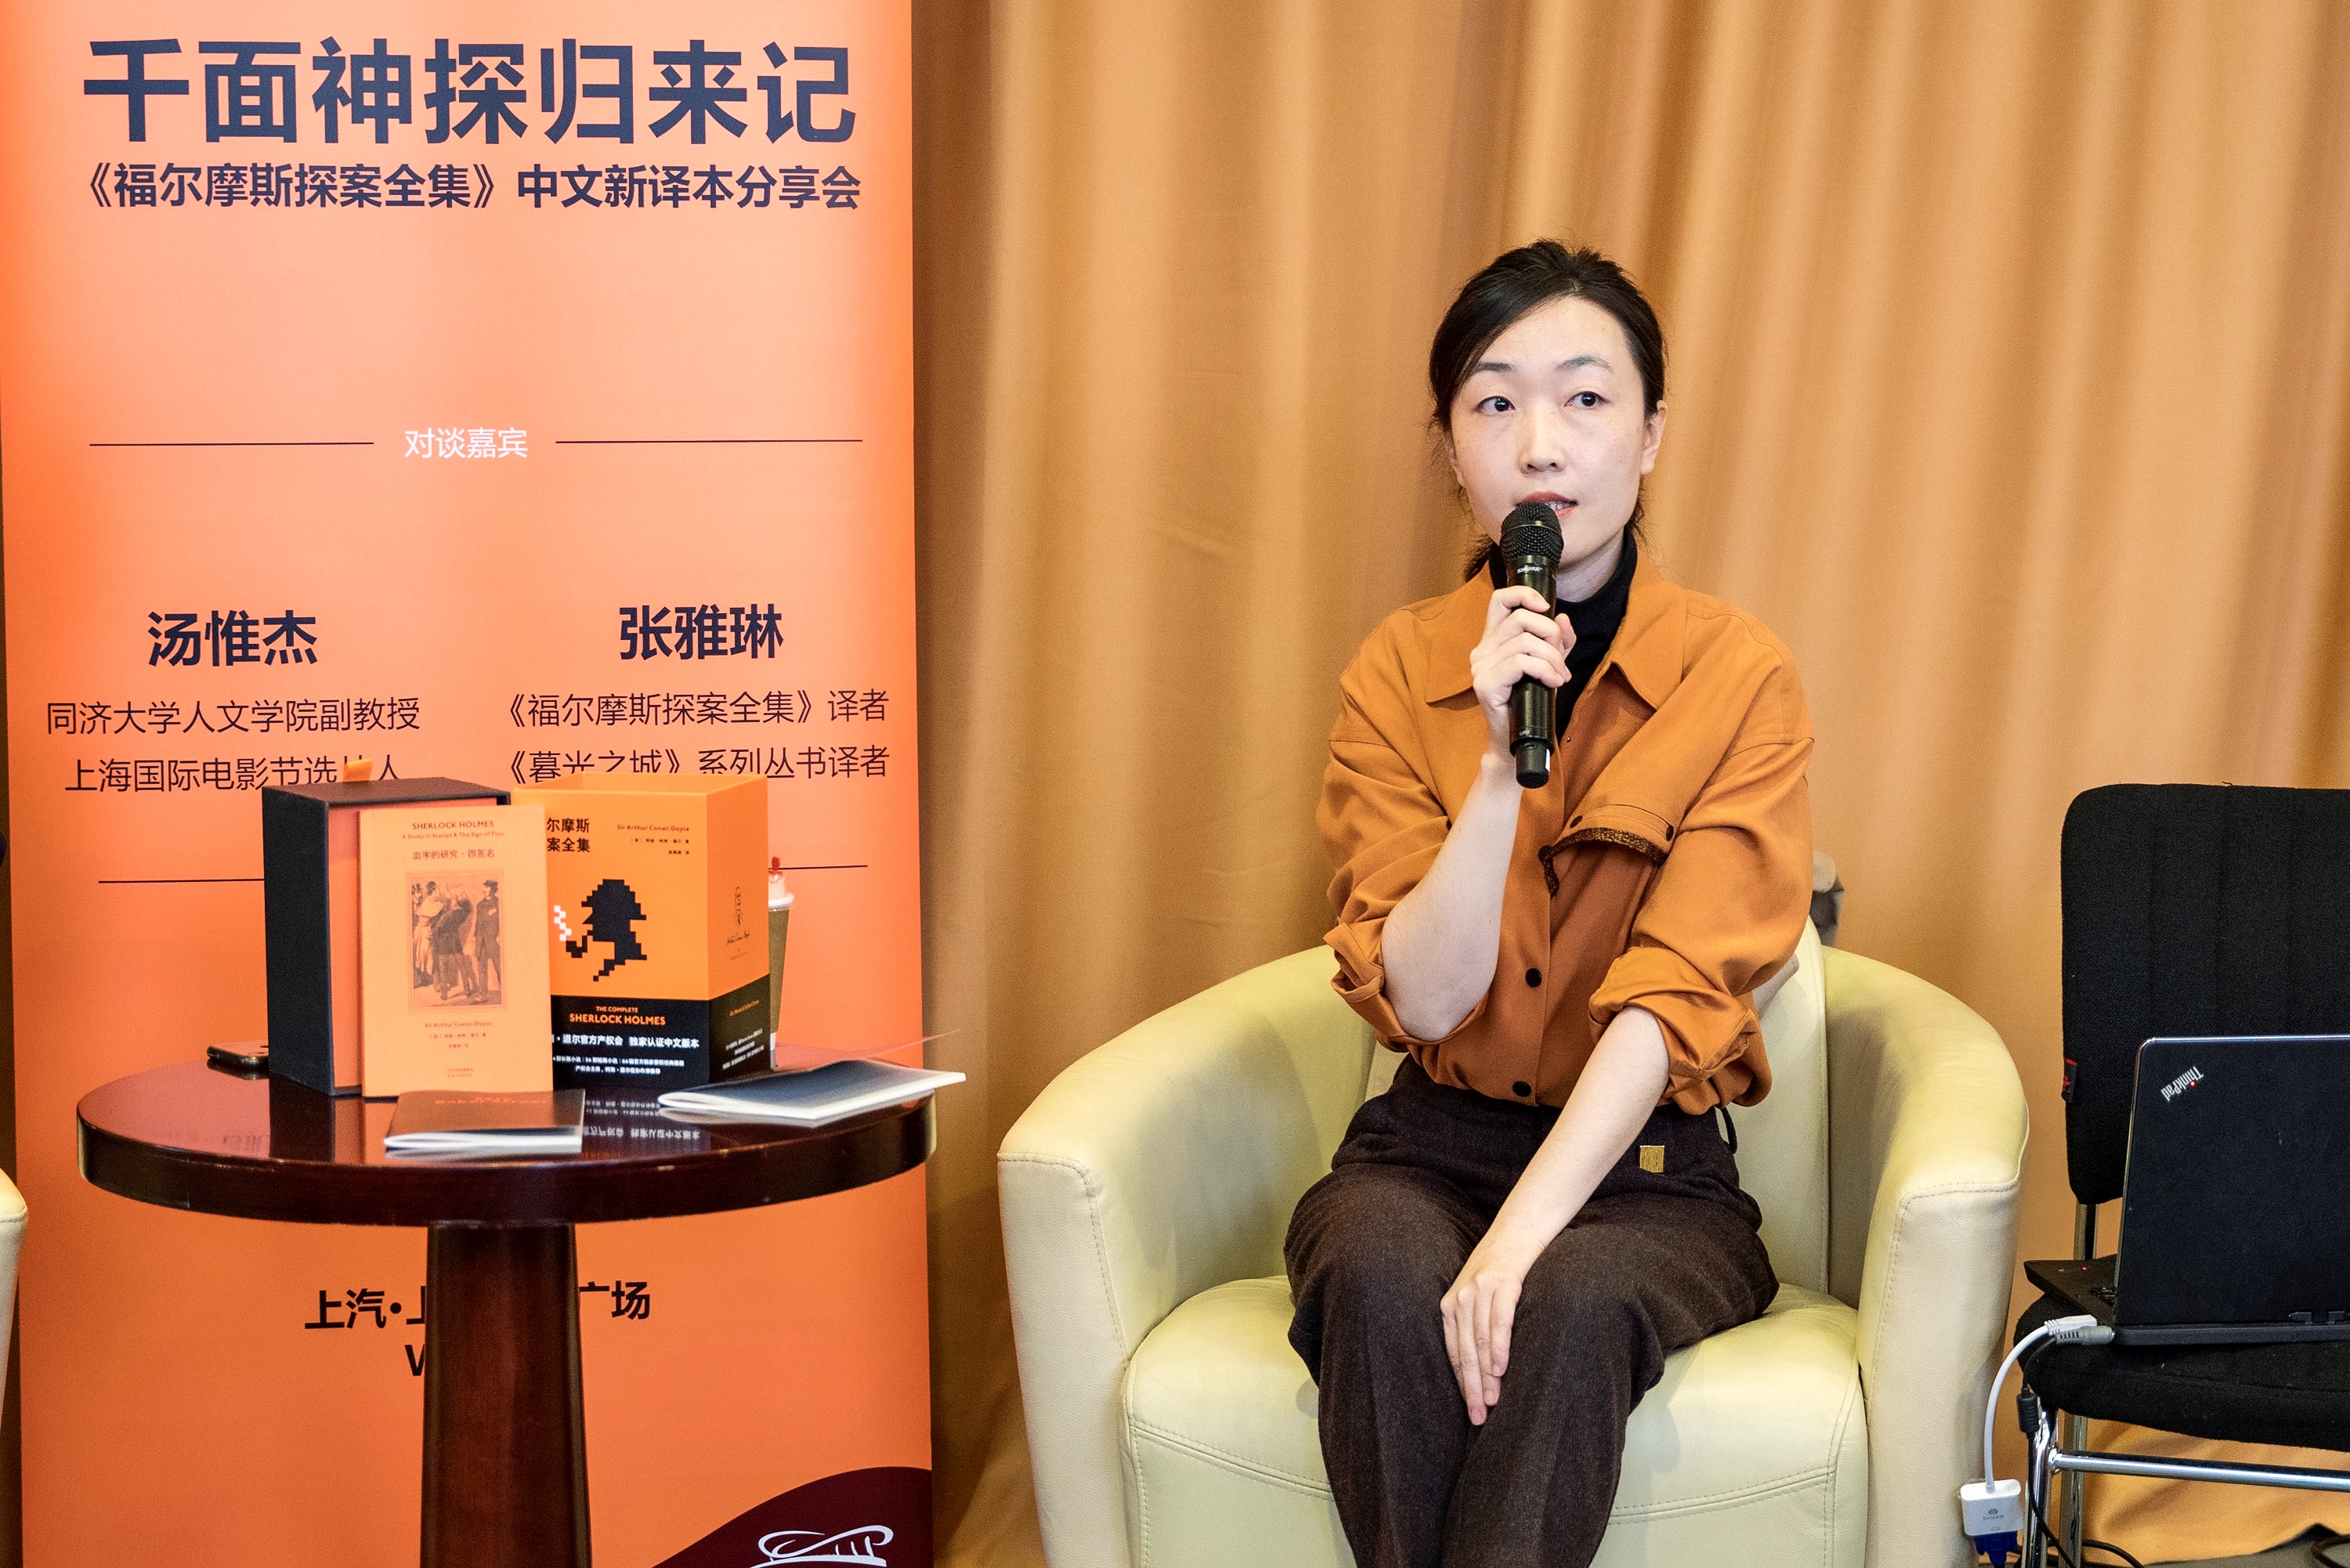 The Shanghai Launch Event For The Complete Sherlock Holmes